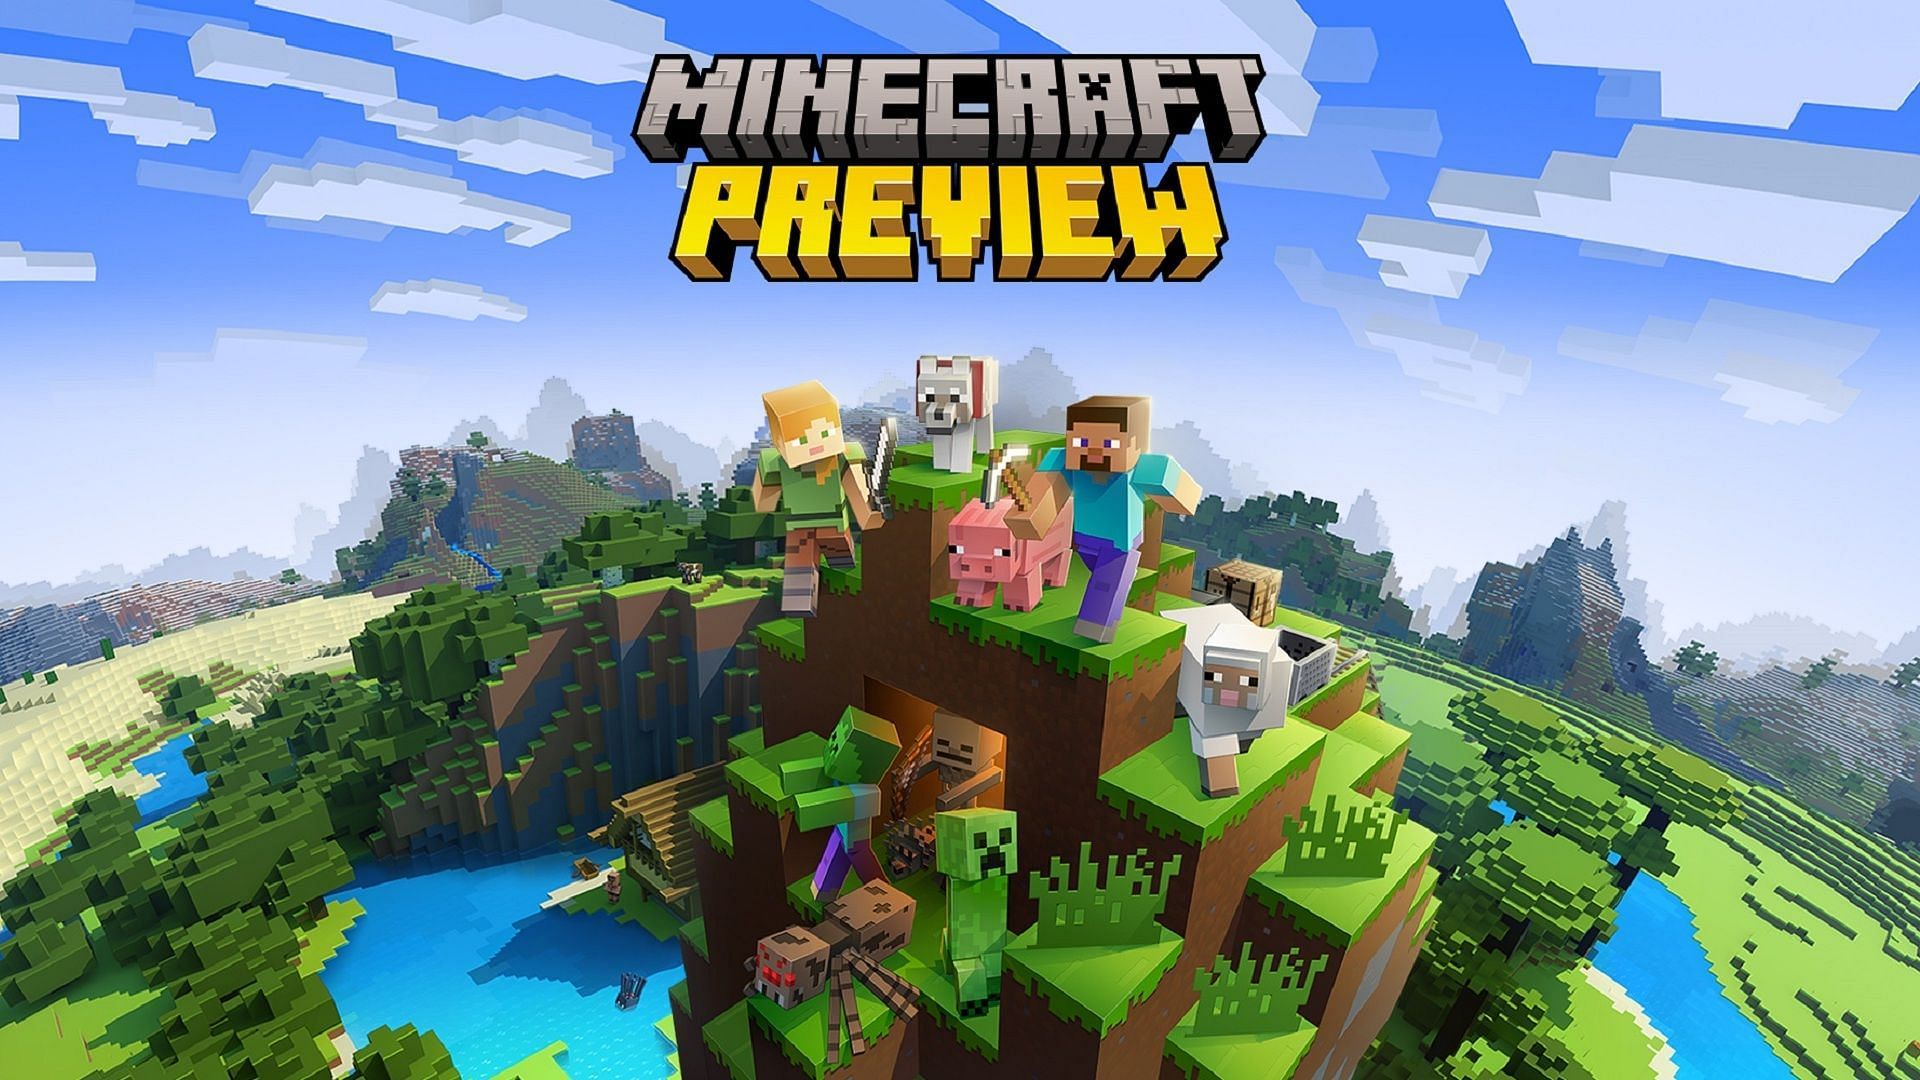 Minecraft Preview has its own application on Xbox consoles (Image via Mojang)